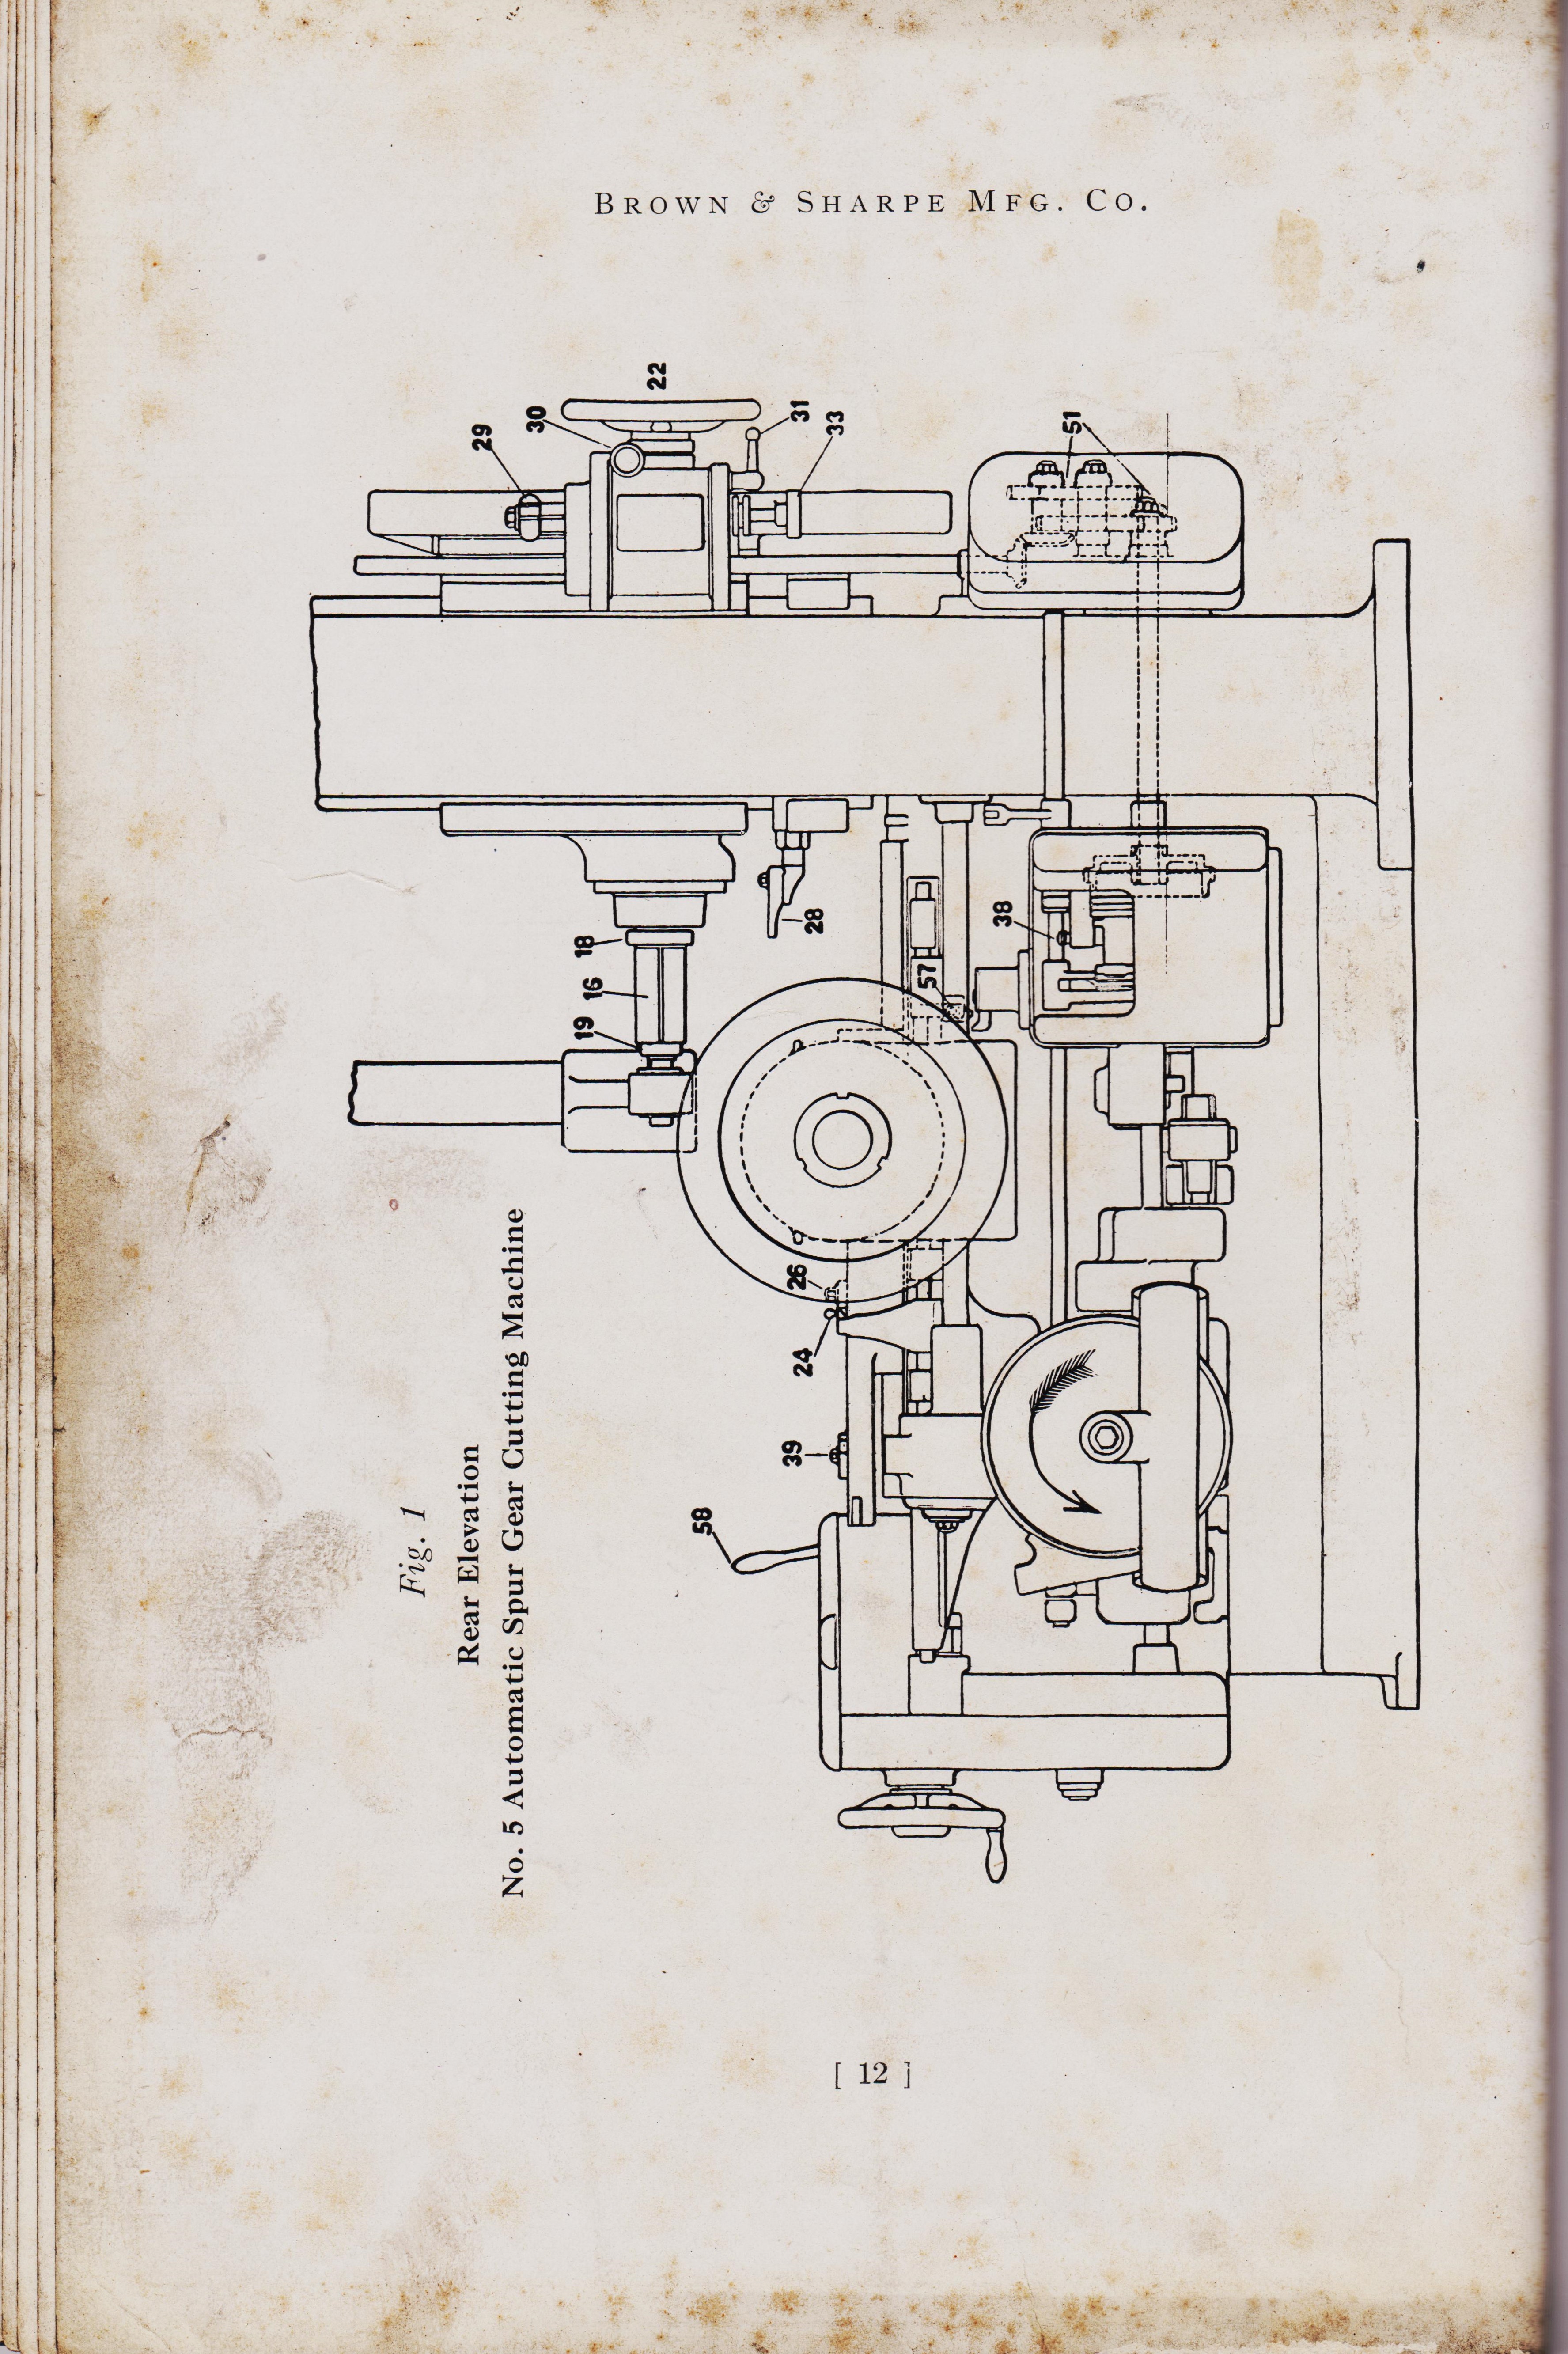 https://antiquemachinery.com/images-2020/Automatic-Gear-Cutting-Machines-Brown-and-Sharpe-Mfg-Co-1914-pg-12-Rear-Elevation-Drawing.jpg